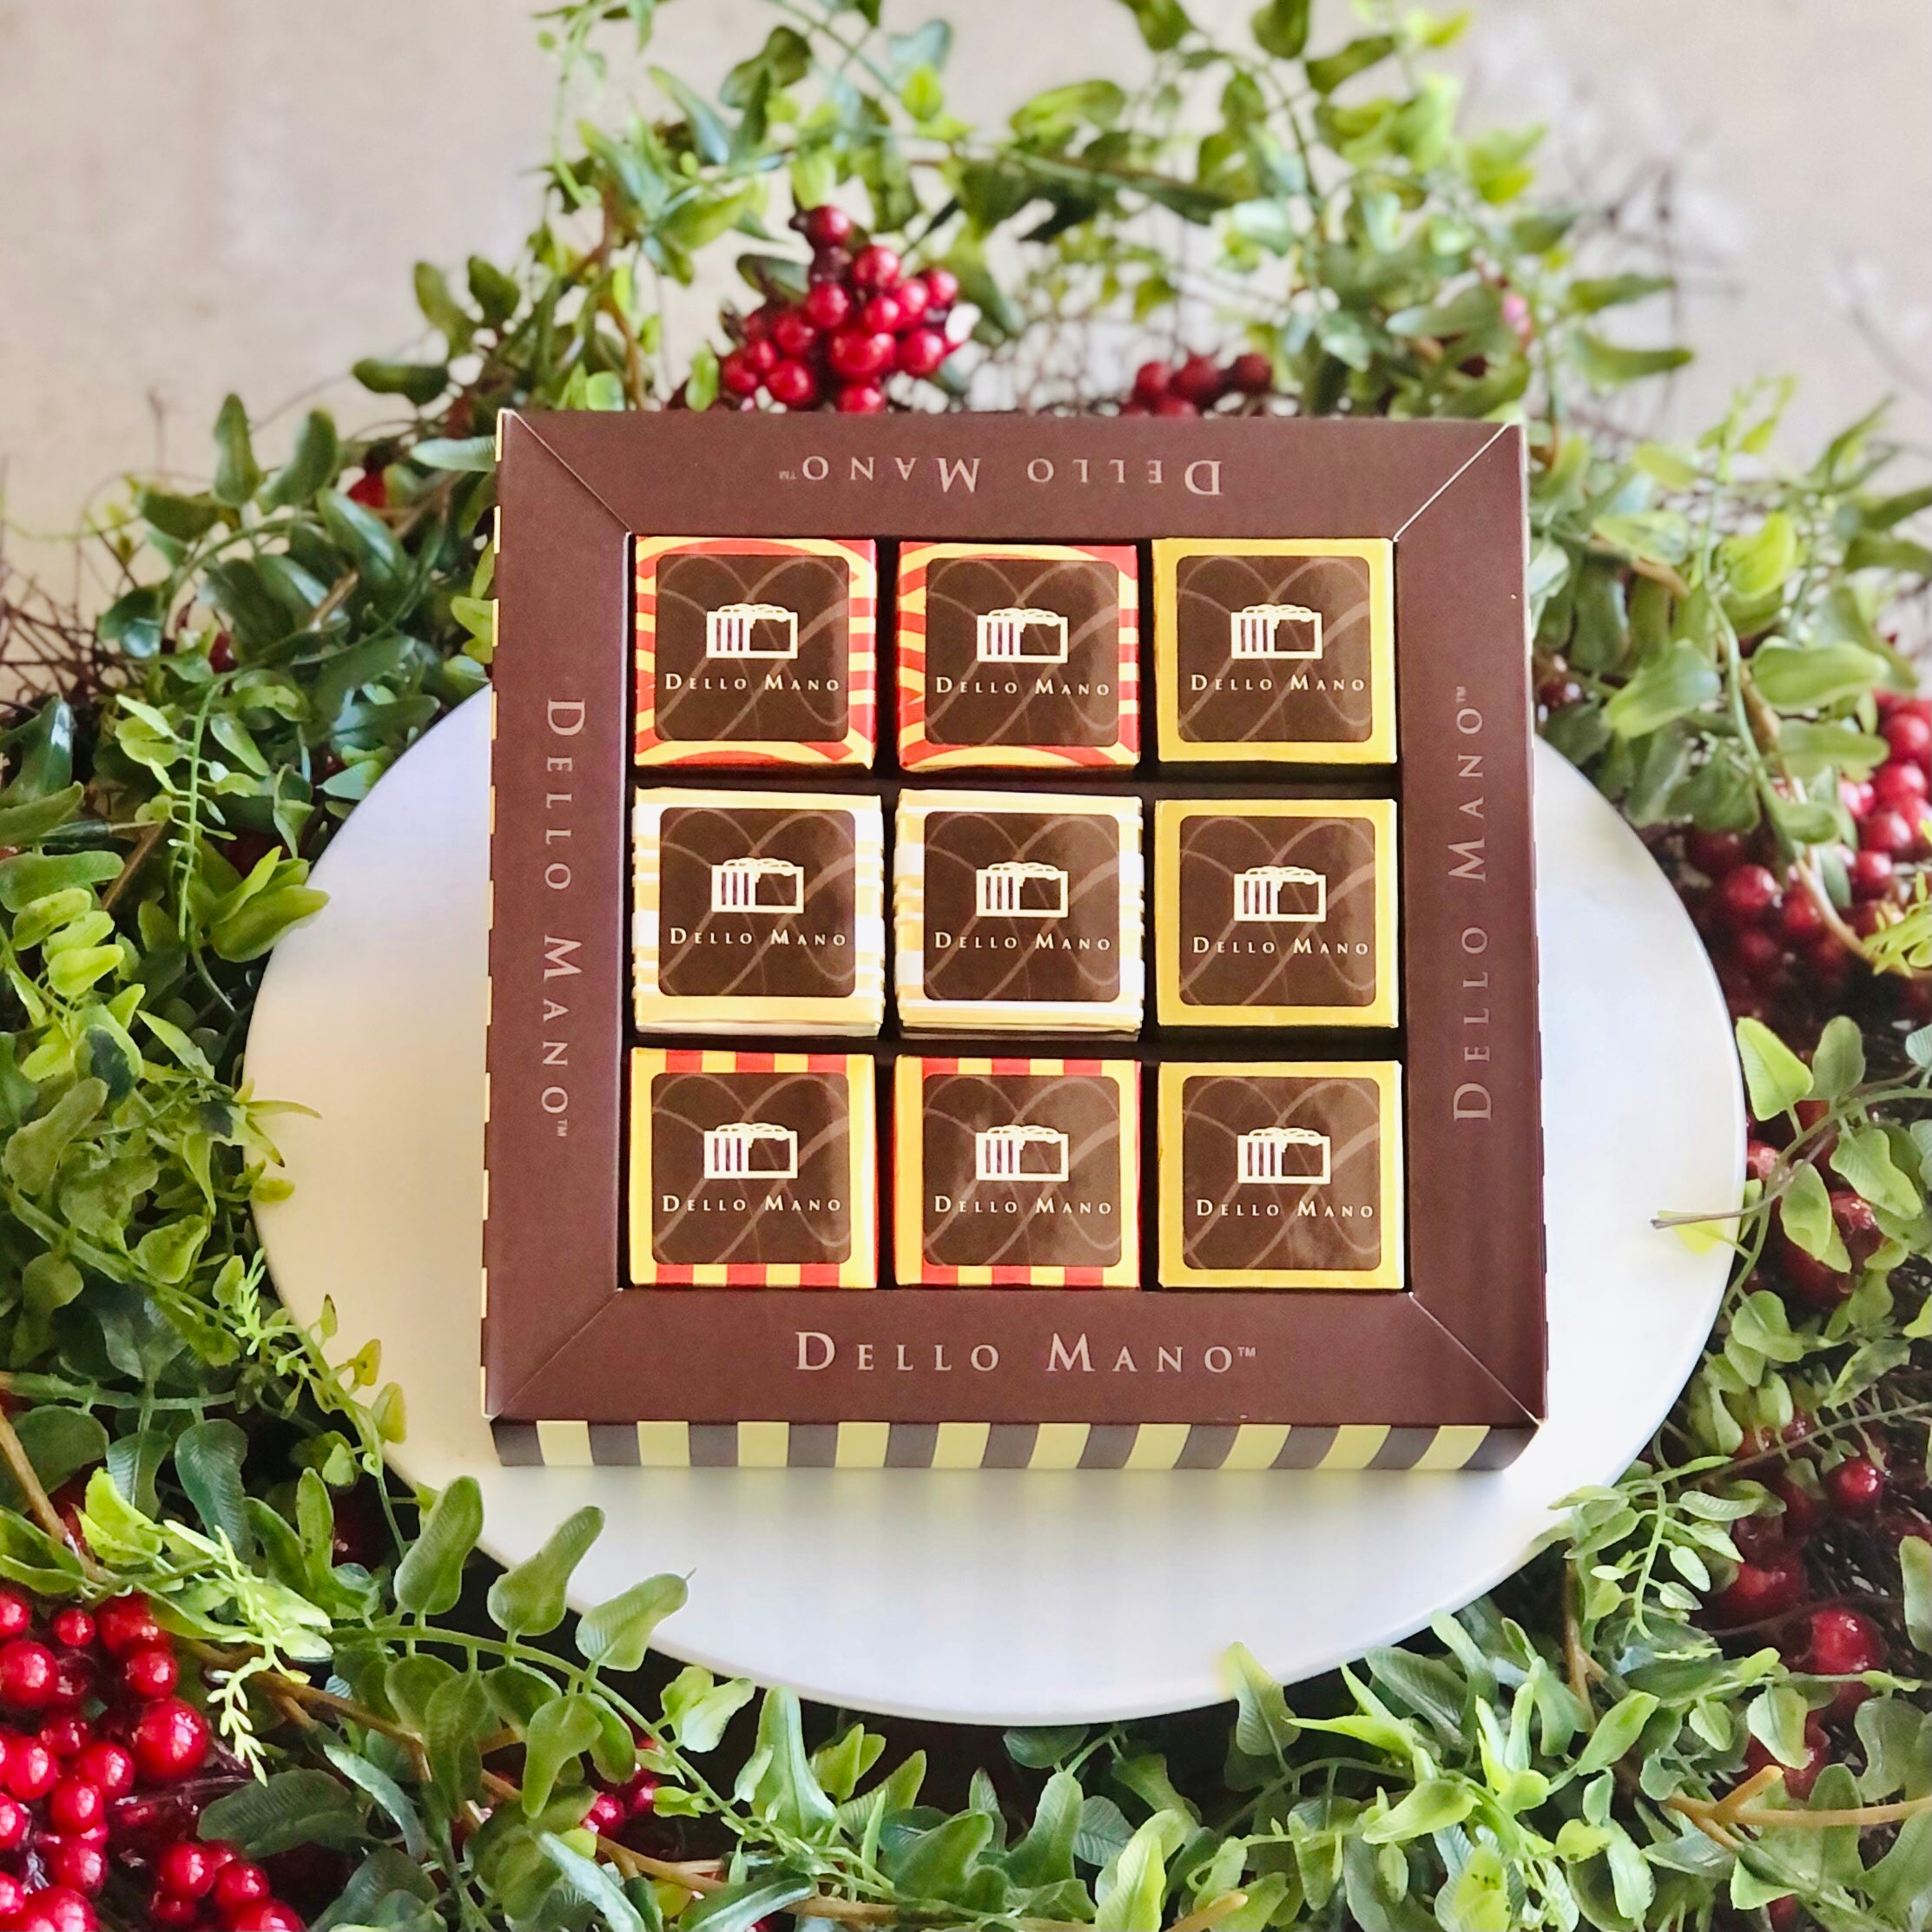 A Christmas Brownie sampler box of 9 brownies. The box says Dello Mano and is surrounded by greenery and red berries